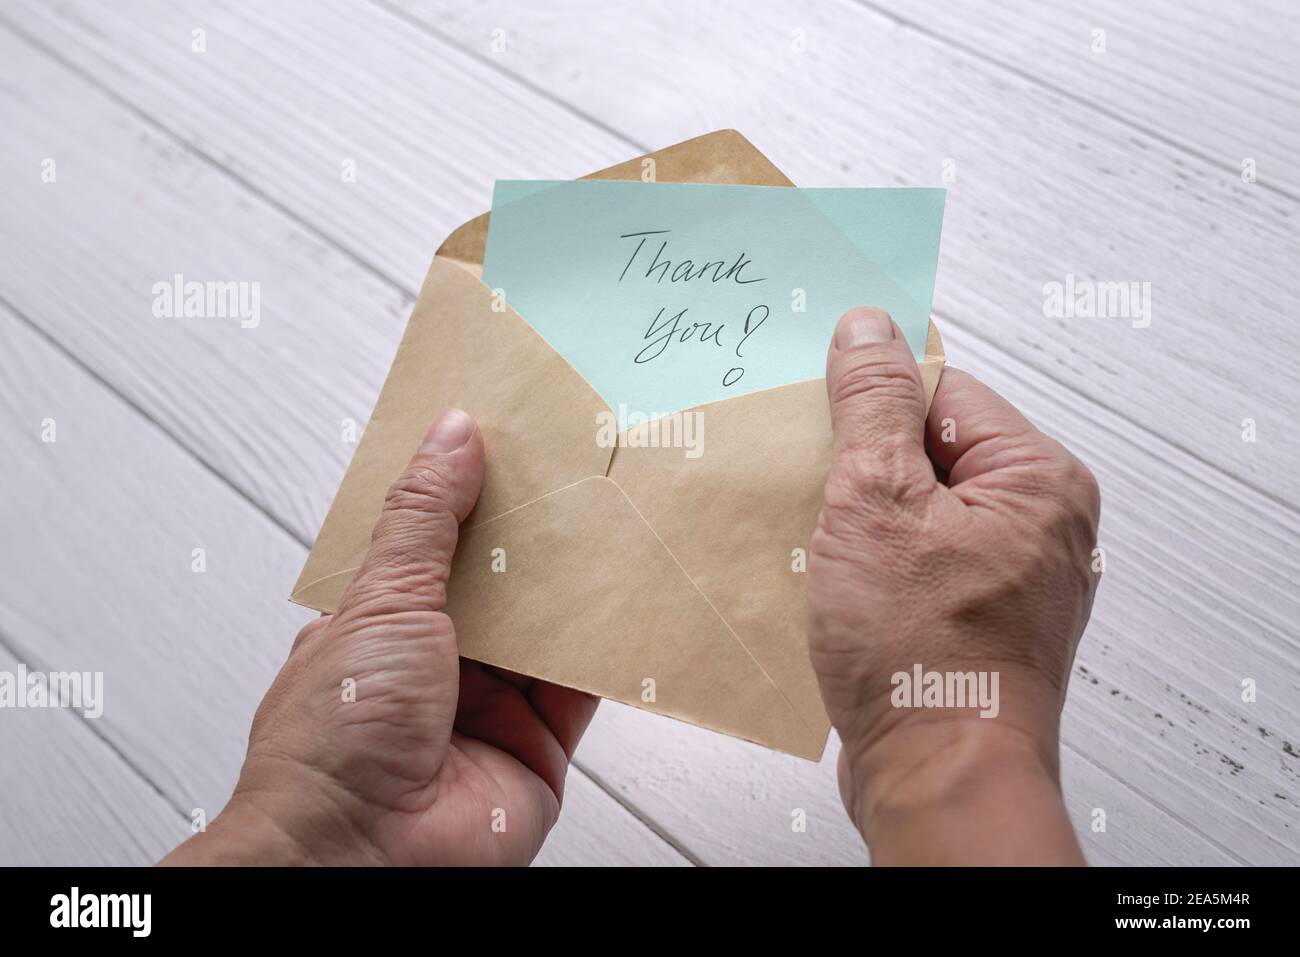 Man open and look at thank you card or note inside a brown envelope. Close up view. Stock Photo